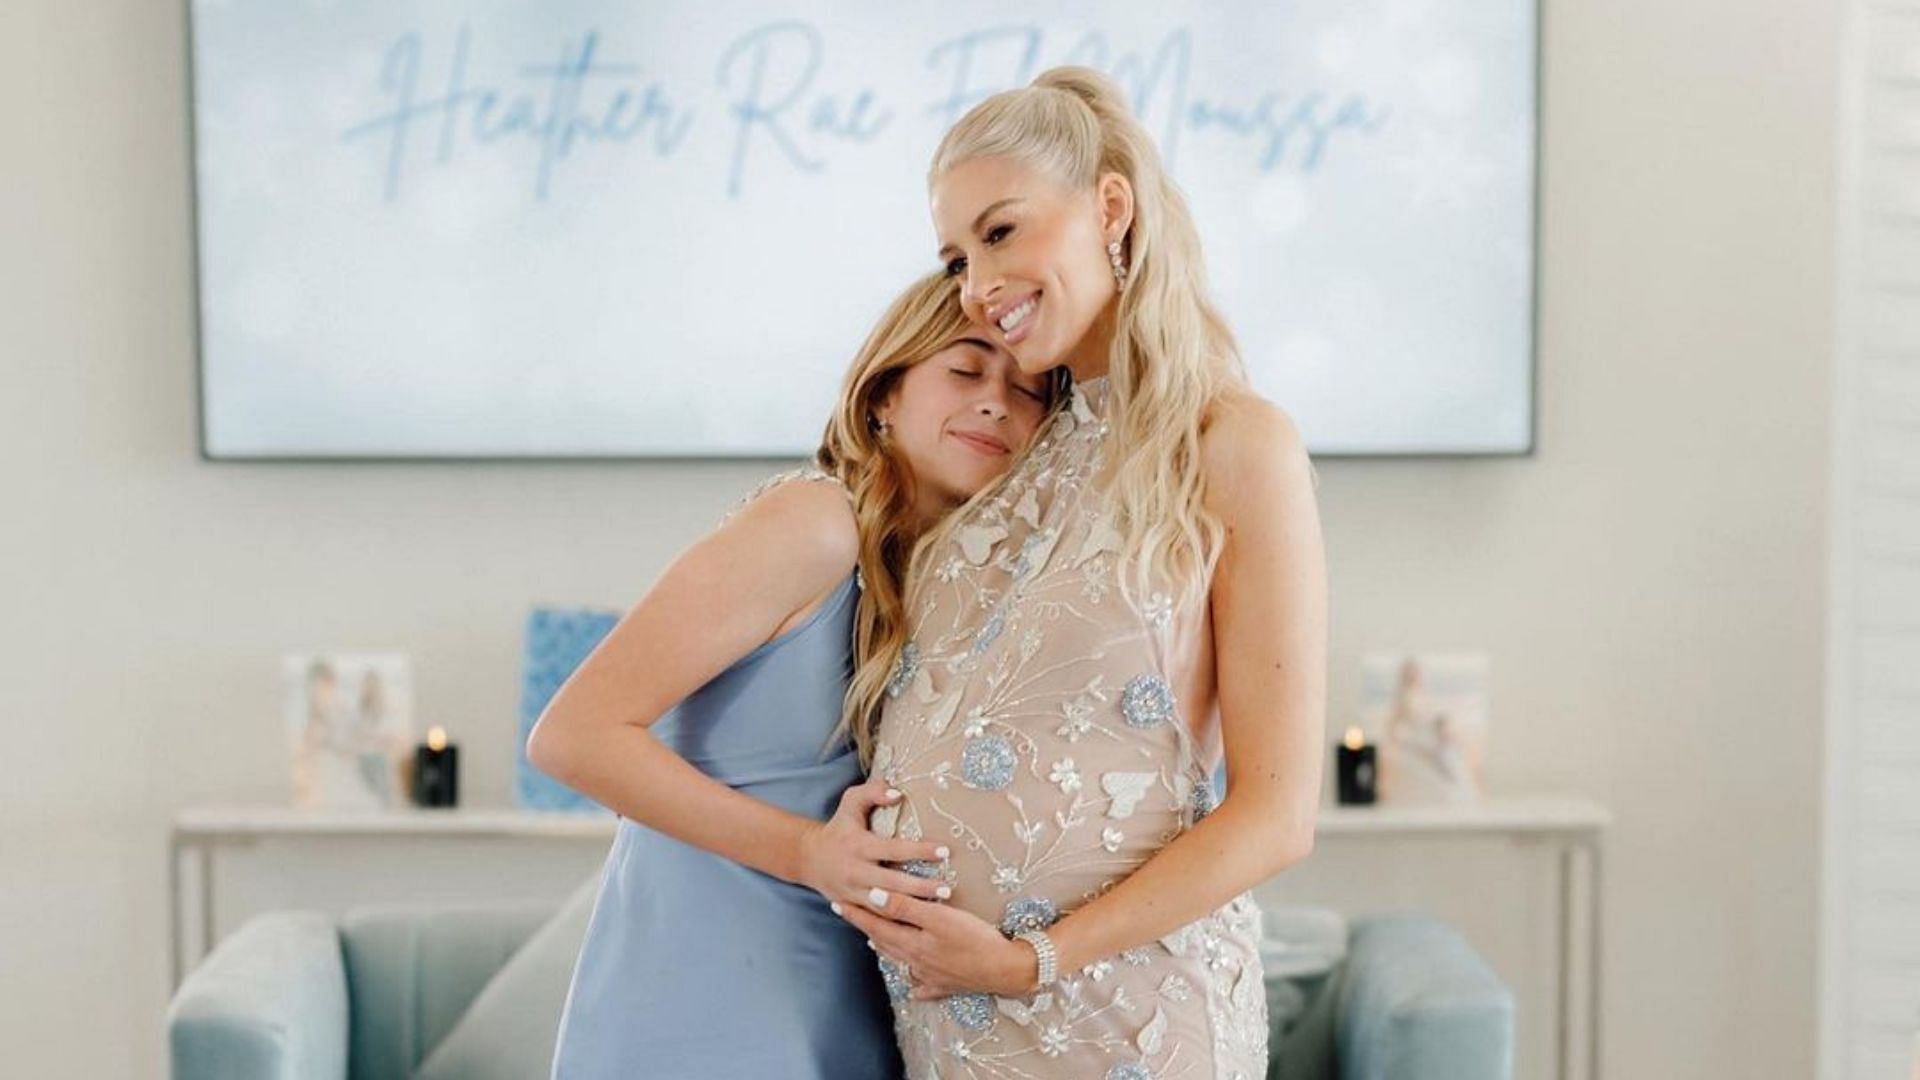 Heather Rae El Moussa to welcome first child with Terek in 2023 (Image via theheatherraeelmoussa/Instagram)